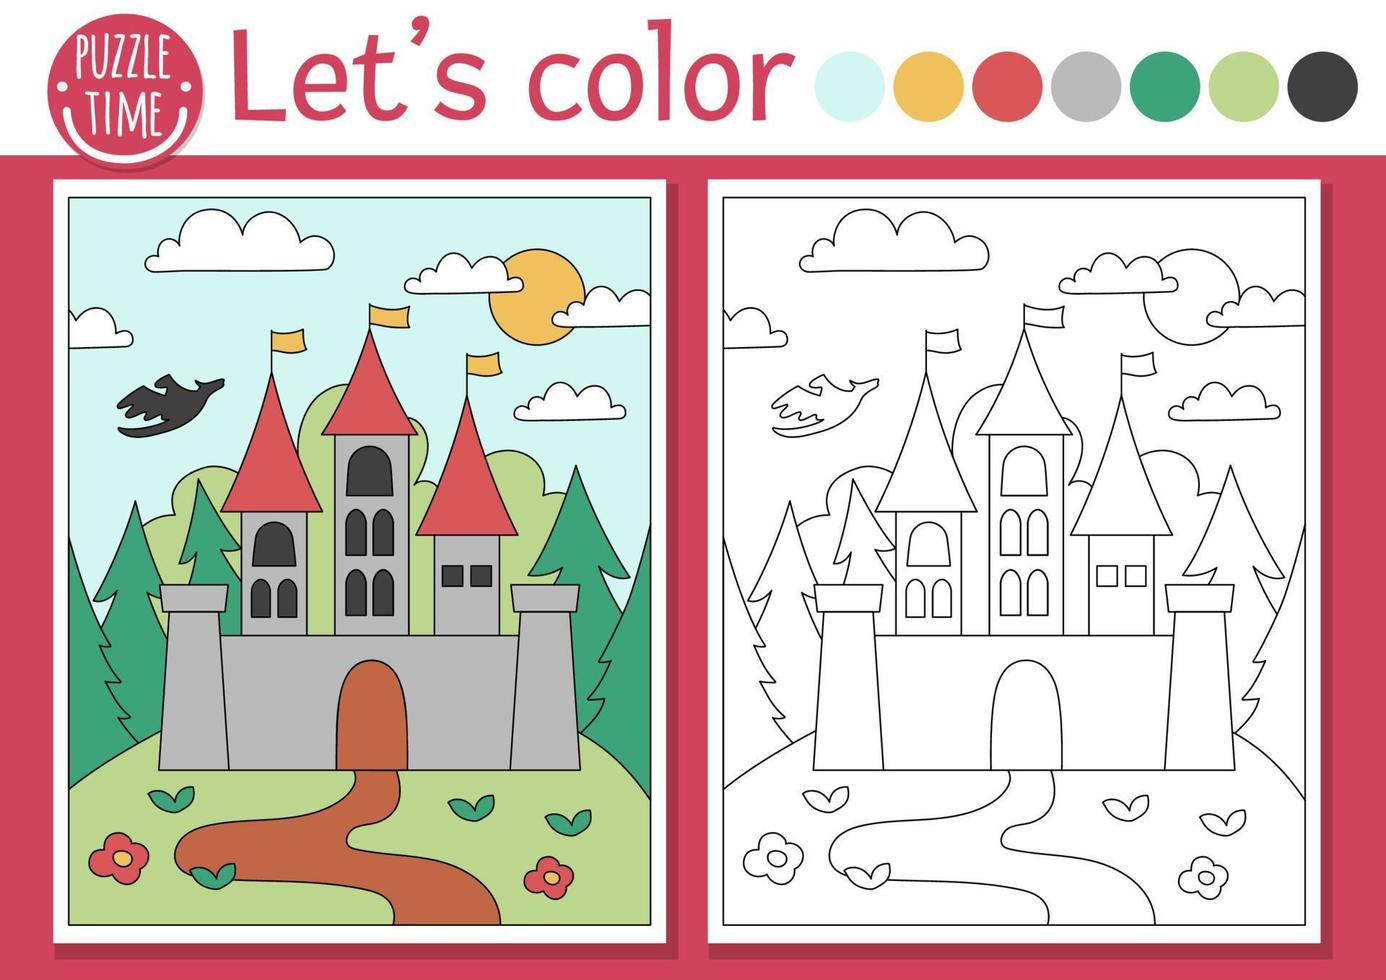 Magic kingdom coloring page for children with castle and forest landscape. Vector fairytale outline illustration. Color book for kids with colored example. Drawing skills printable worksheet